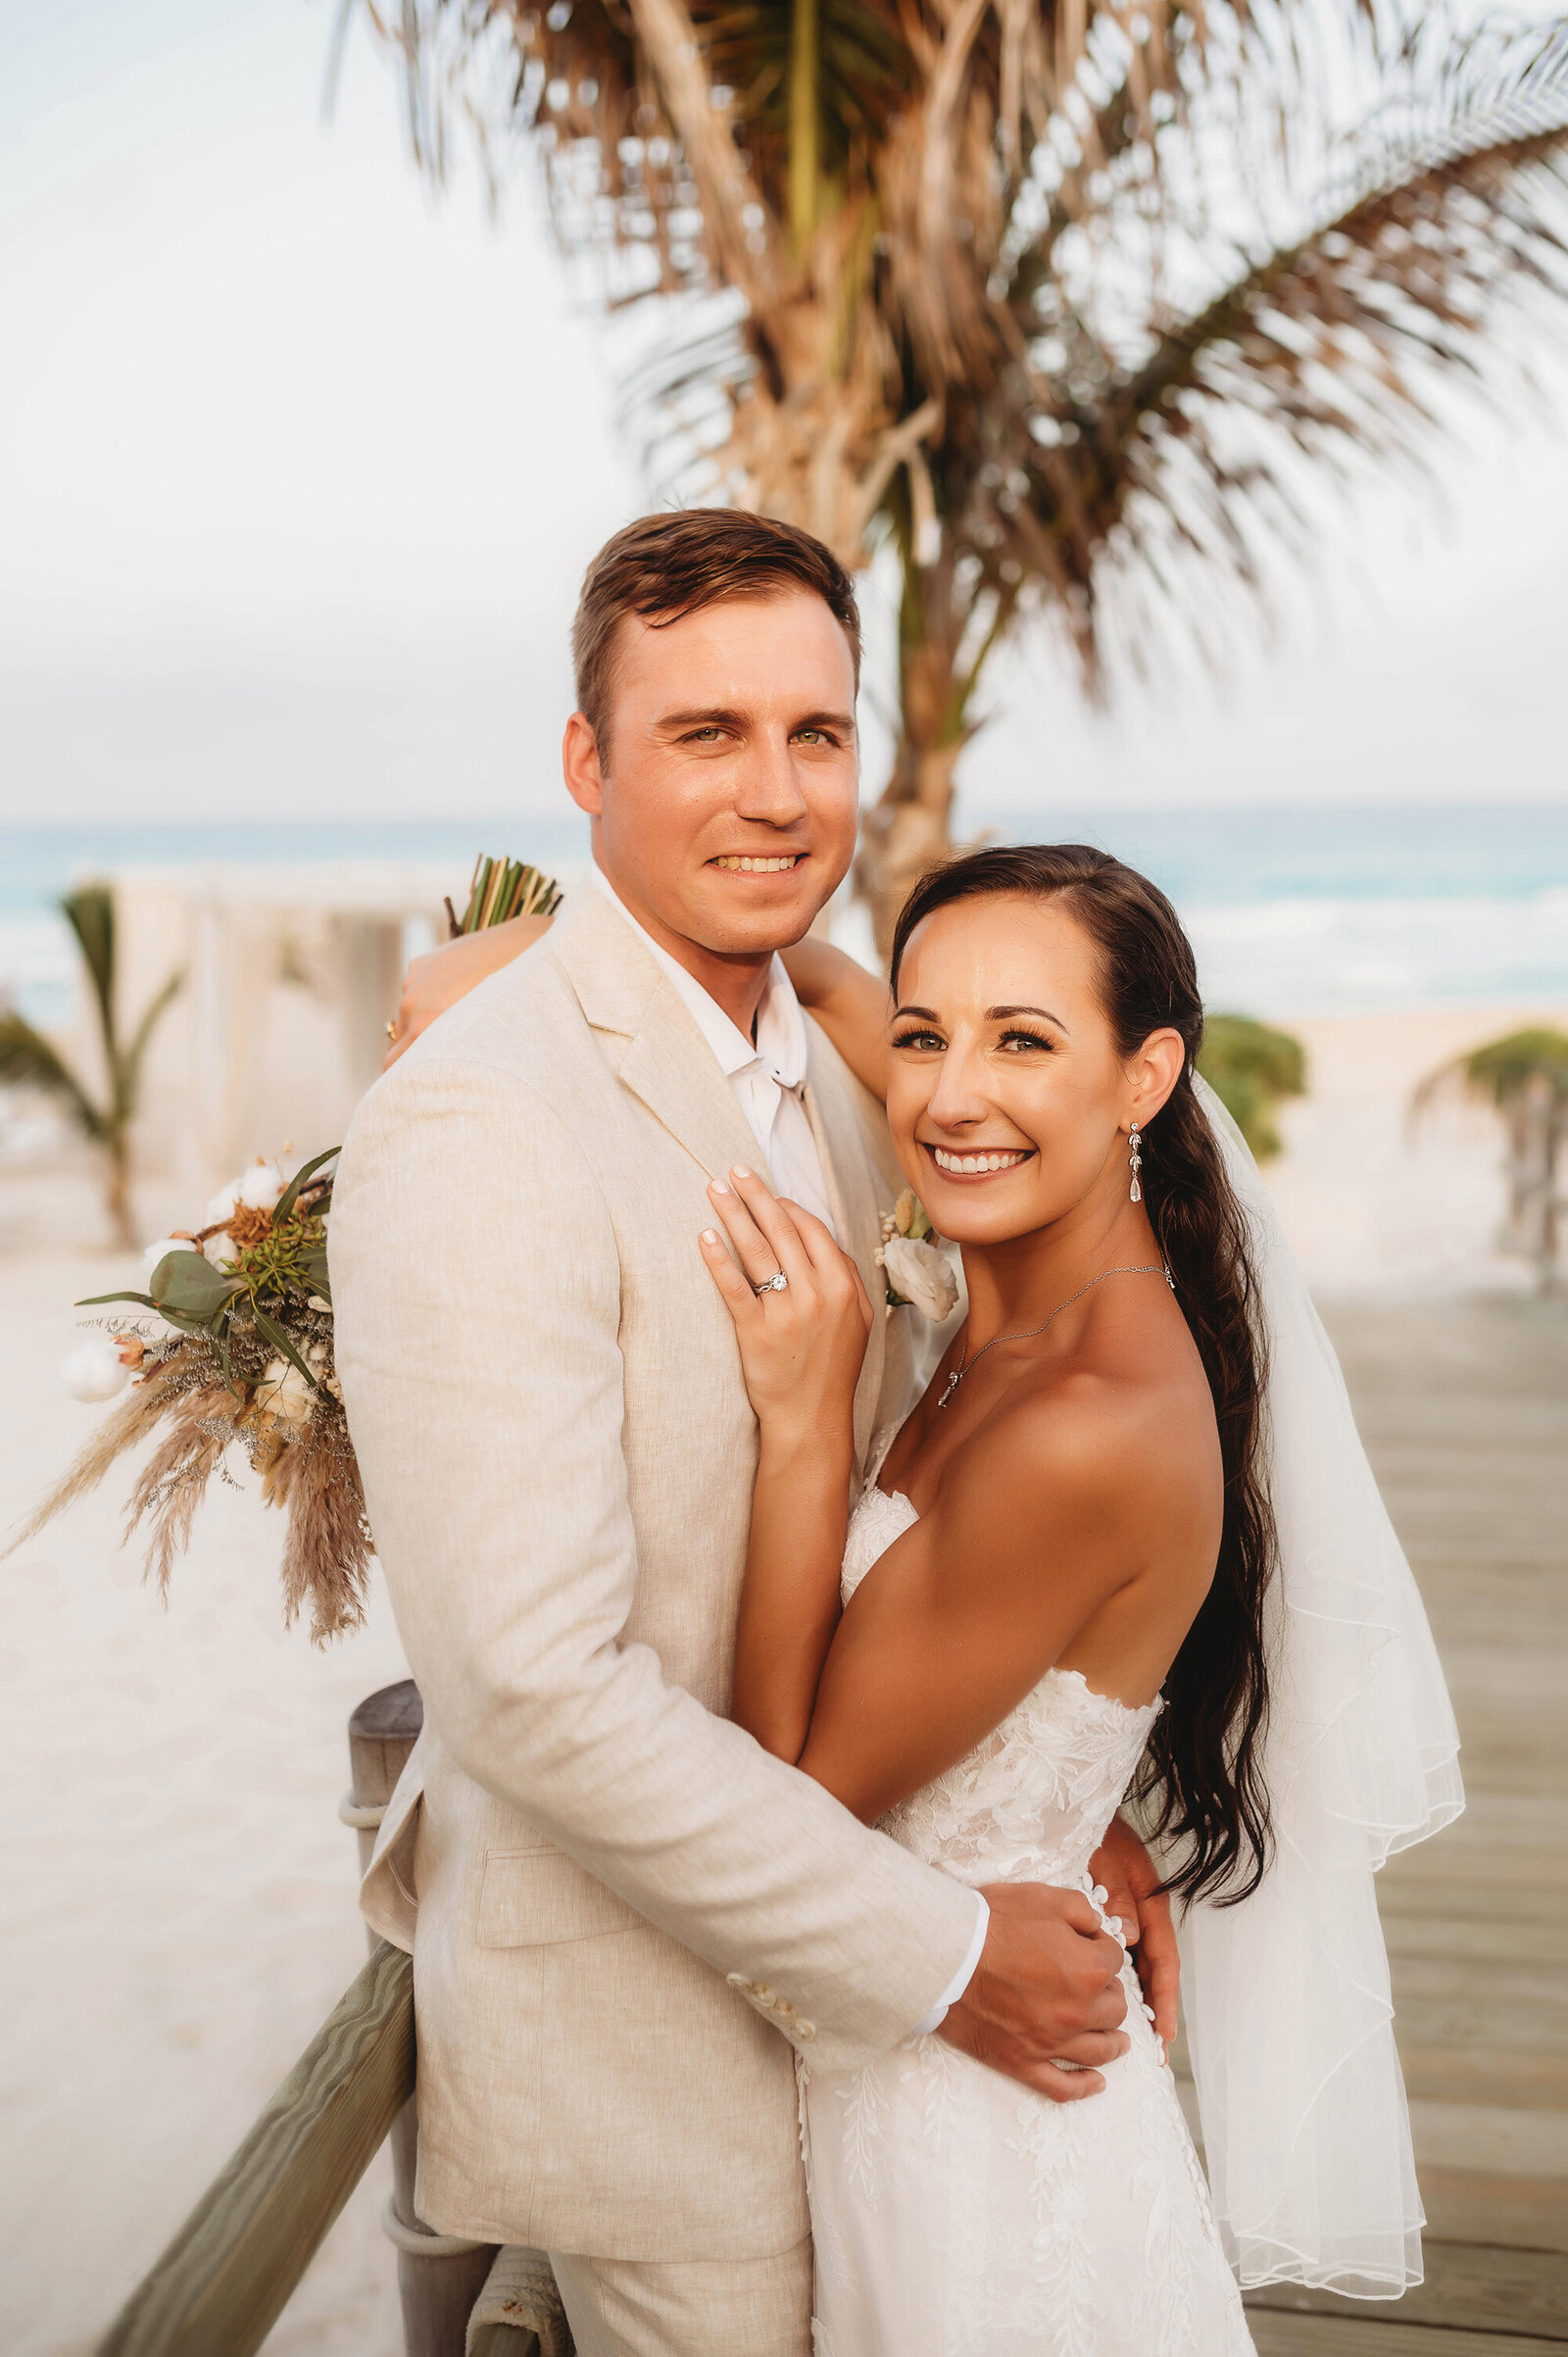 Newlyweds embrace during Elopement in Cancun Mexico.